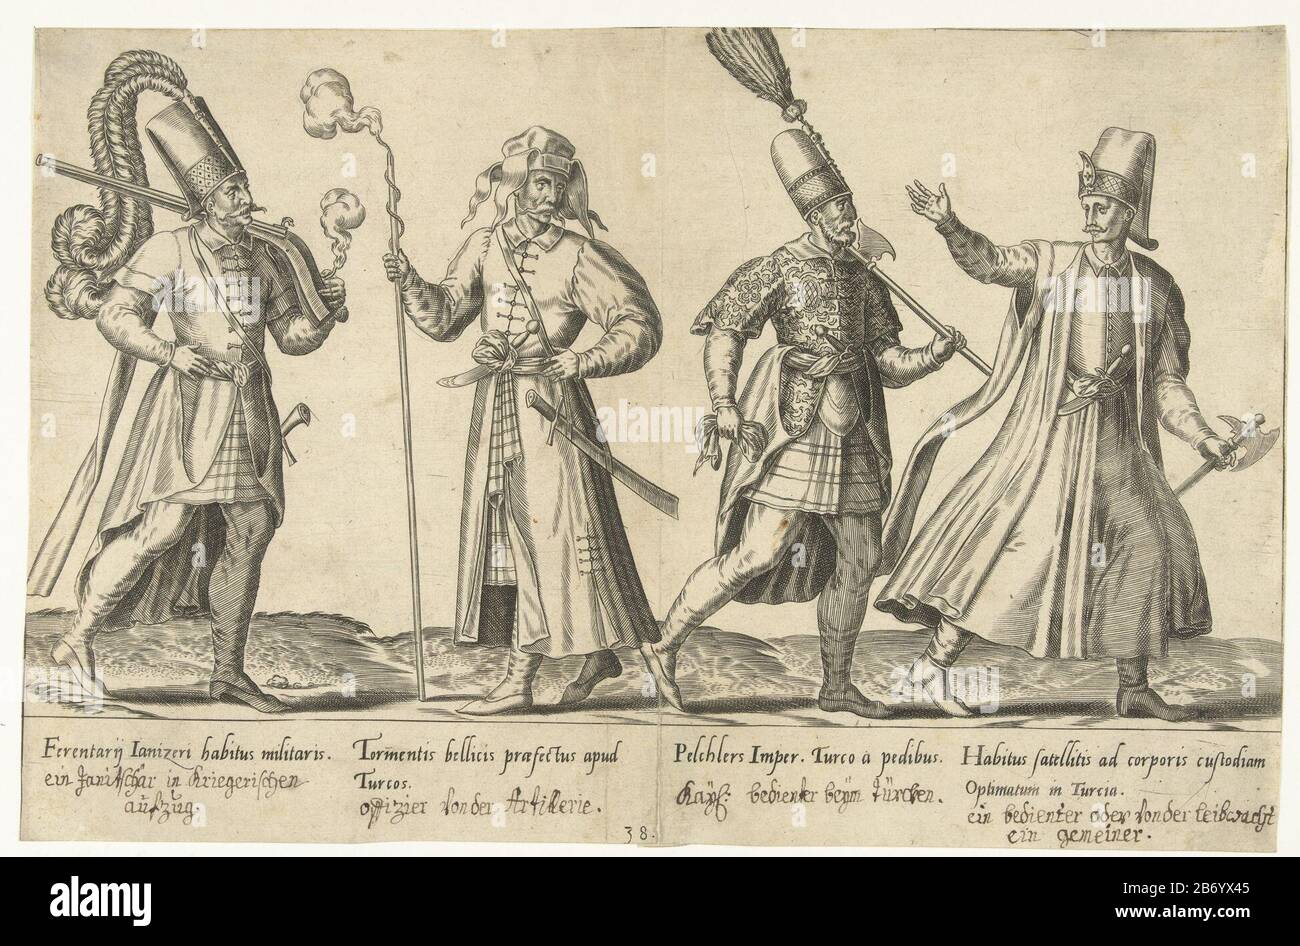 Op grote schaal strijd Dierbare Kleding van Ottomaanse soldaten rond 1580 Traditionele kleding van over de  hele wereld rond 1580 (serietitel) Print out a book on sixteenth-century  clothing around 1580. Four soldiers from the Ottoman army. All